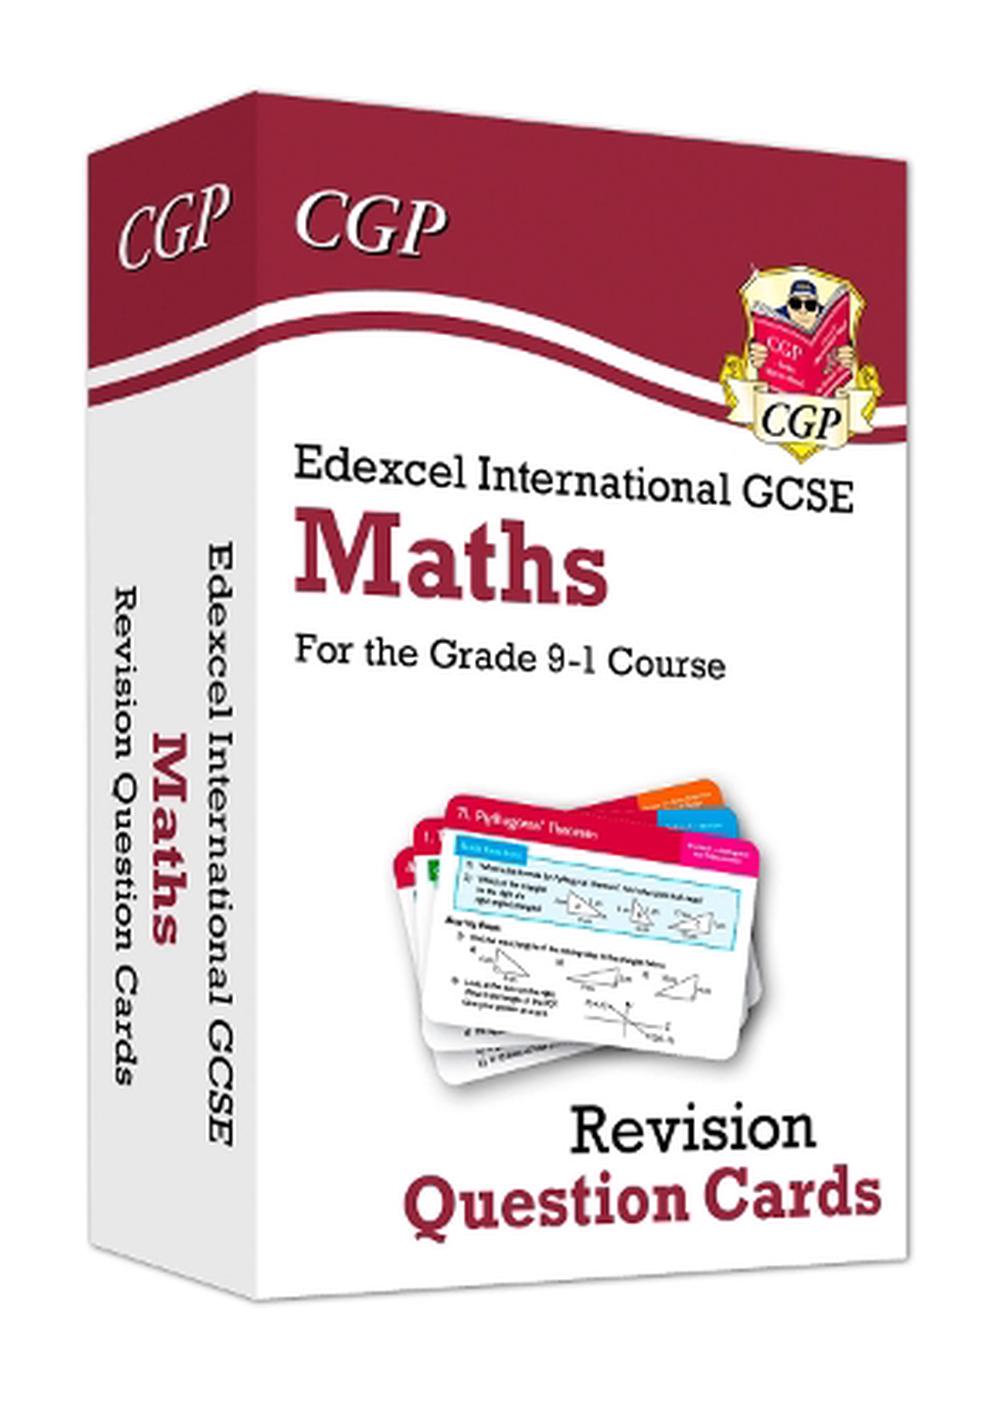 New Grade 9 1 Edexcel International Gcse Maths Revision Question Cards By Cgp Books Book Merchandise Buy Online At Moby The Great